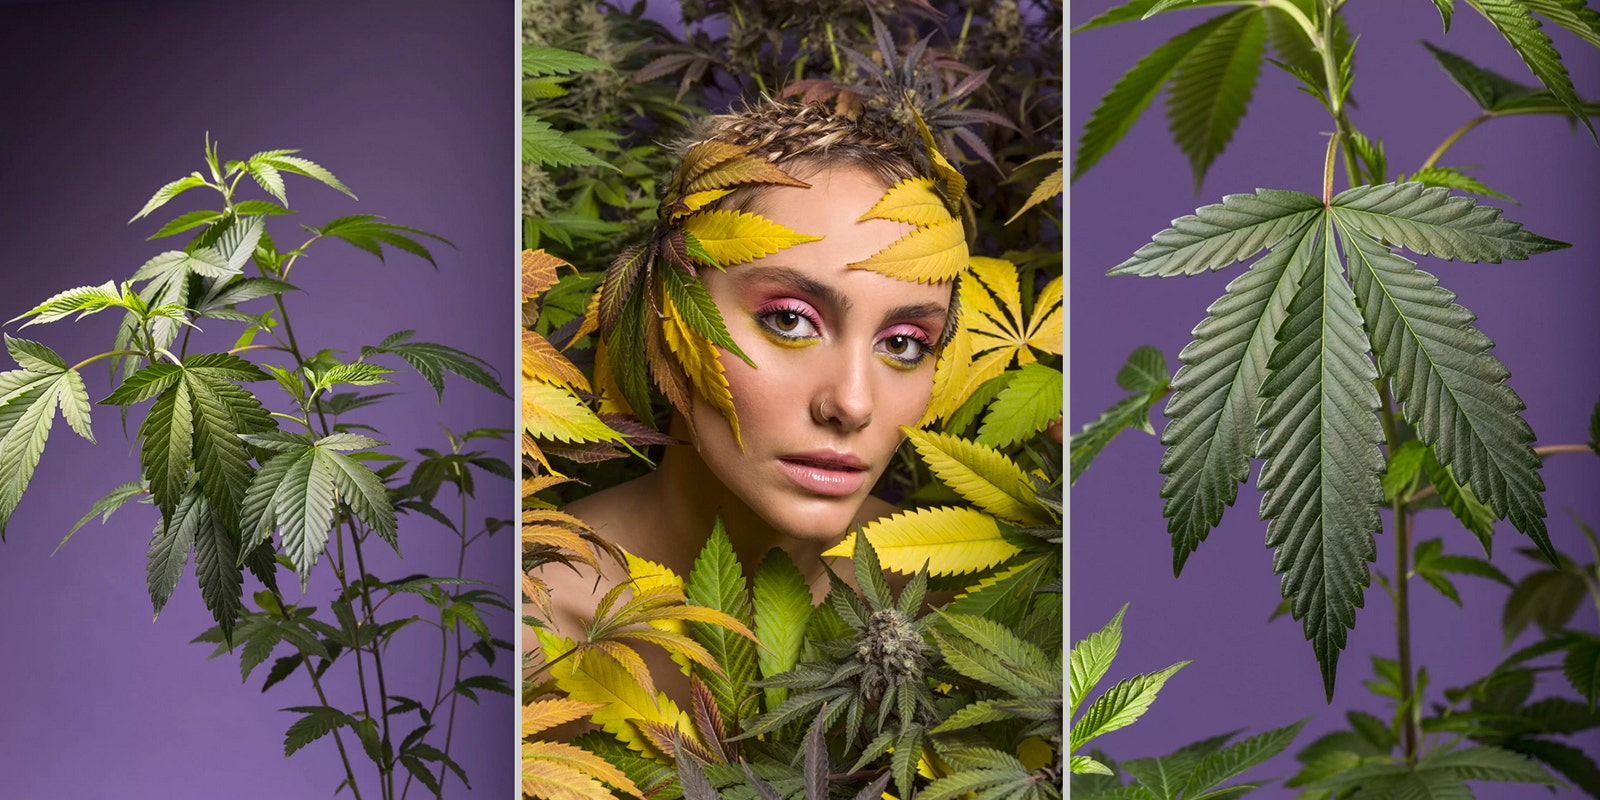 Lelen Ruete's Cannabis Photography: 'The Plant Is Artistic, I Propose To Enhance It'